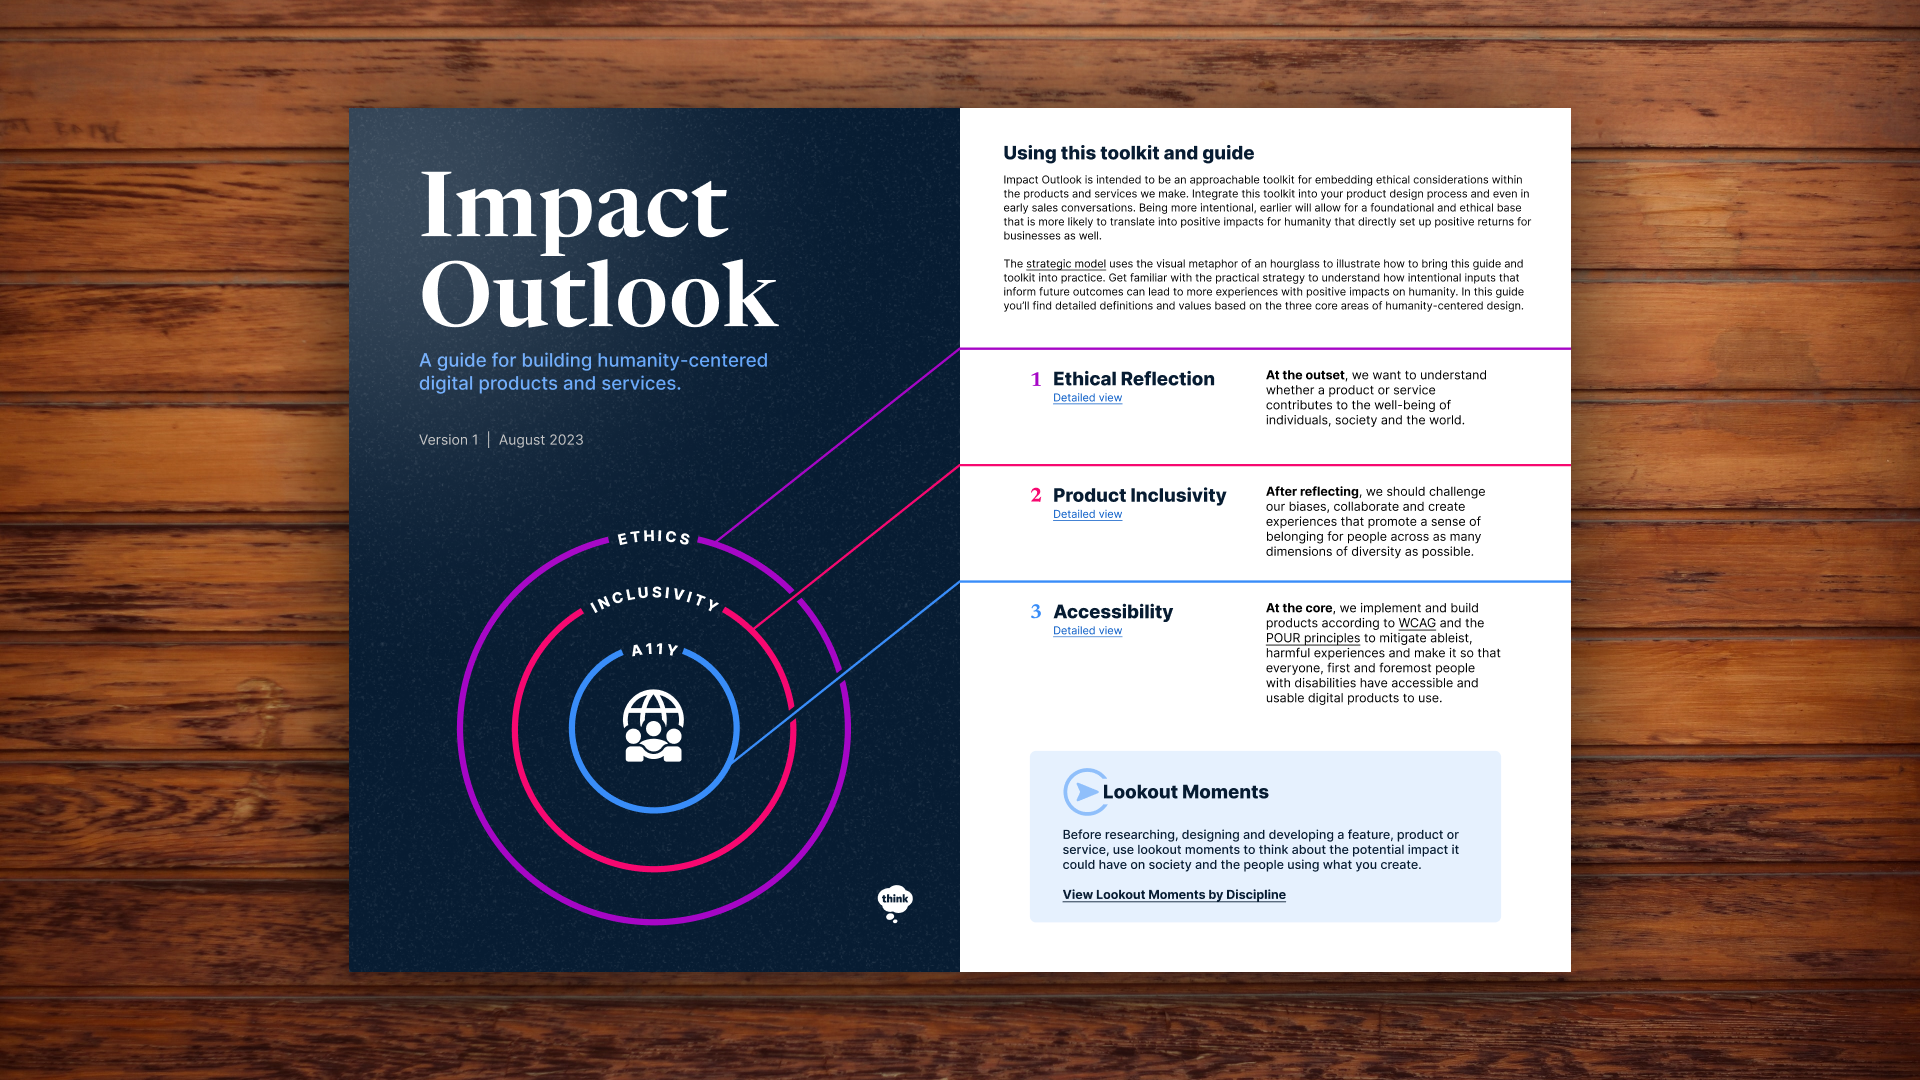 Image of Impact Outlook Guide